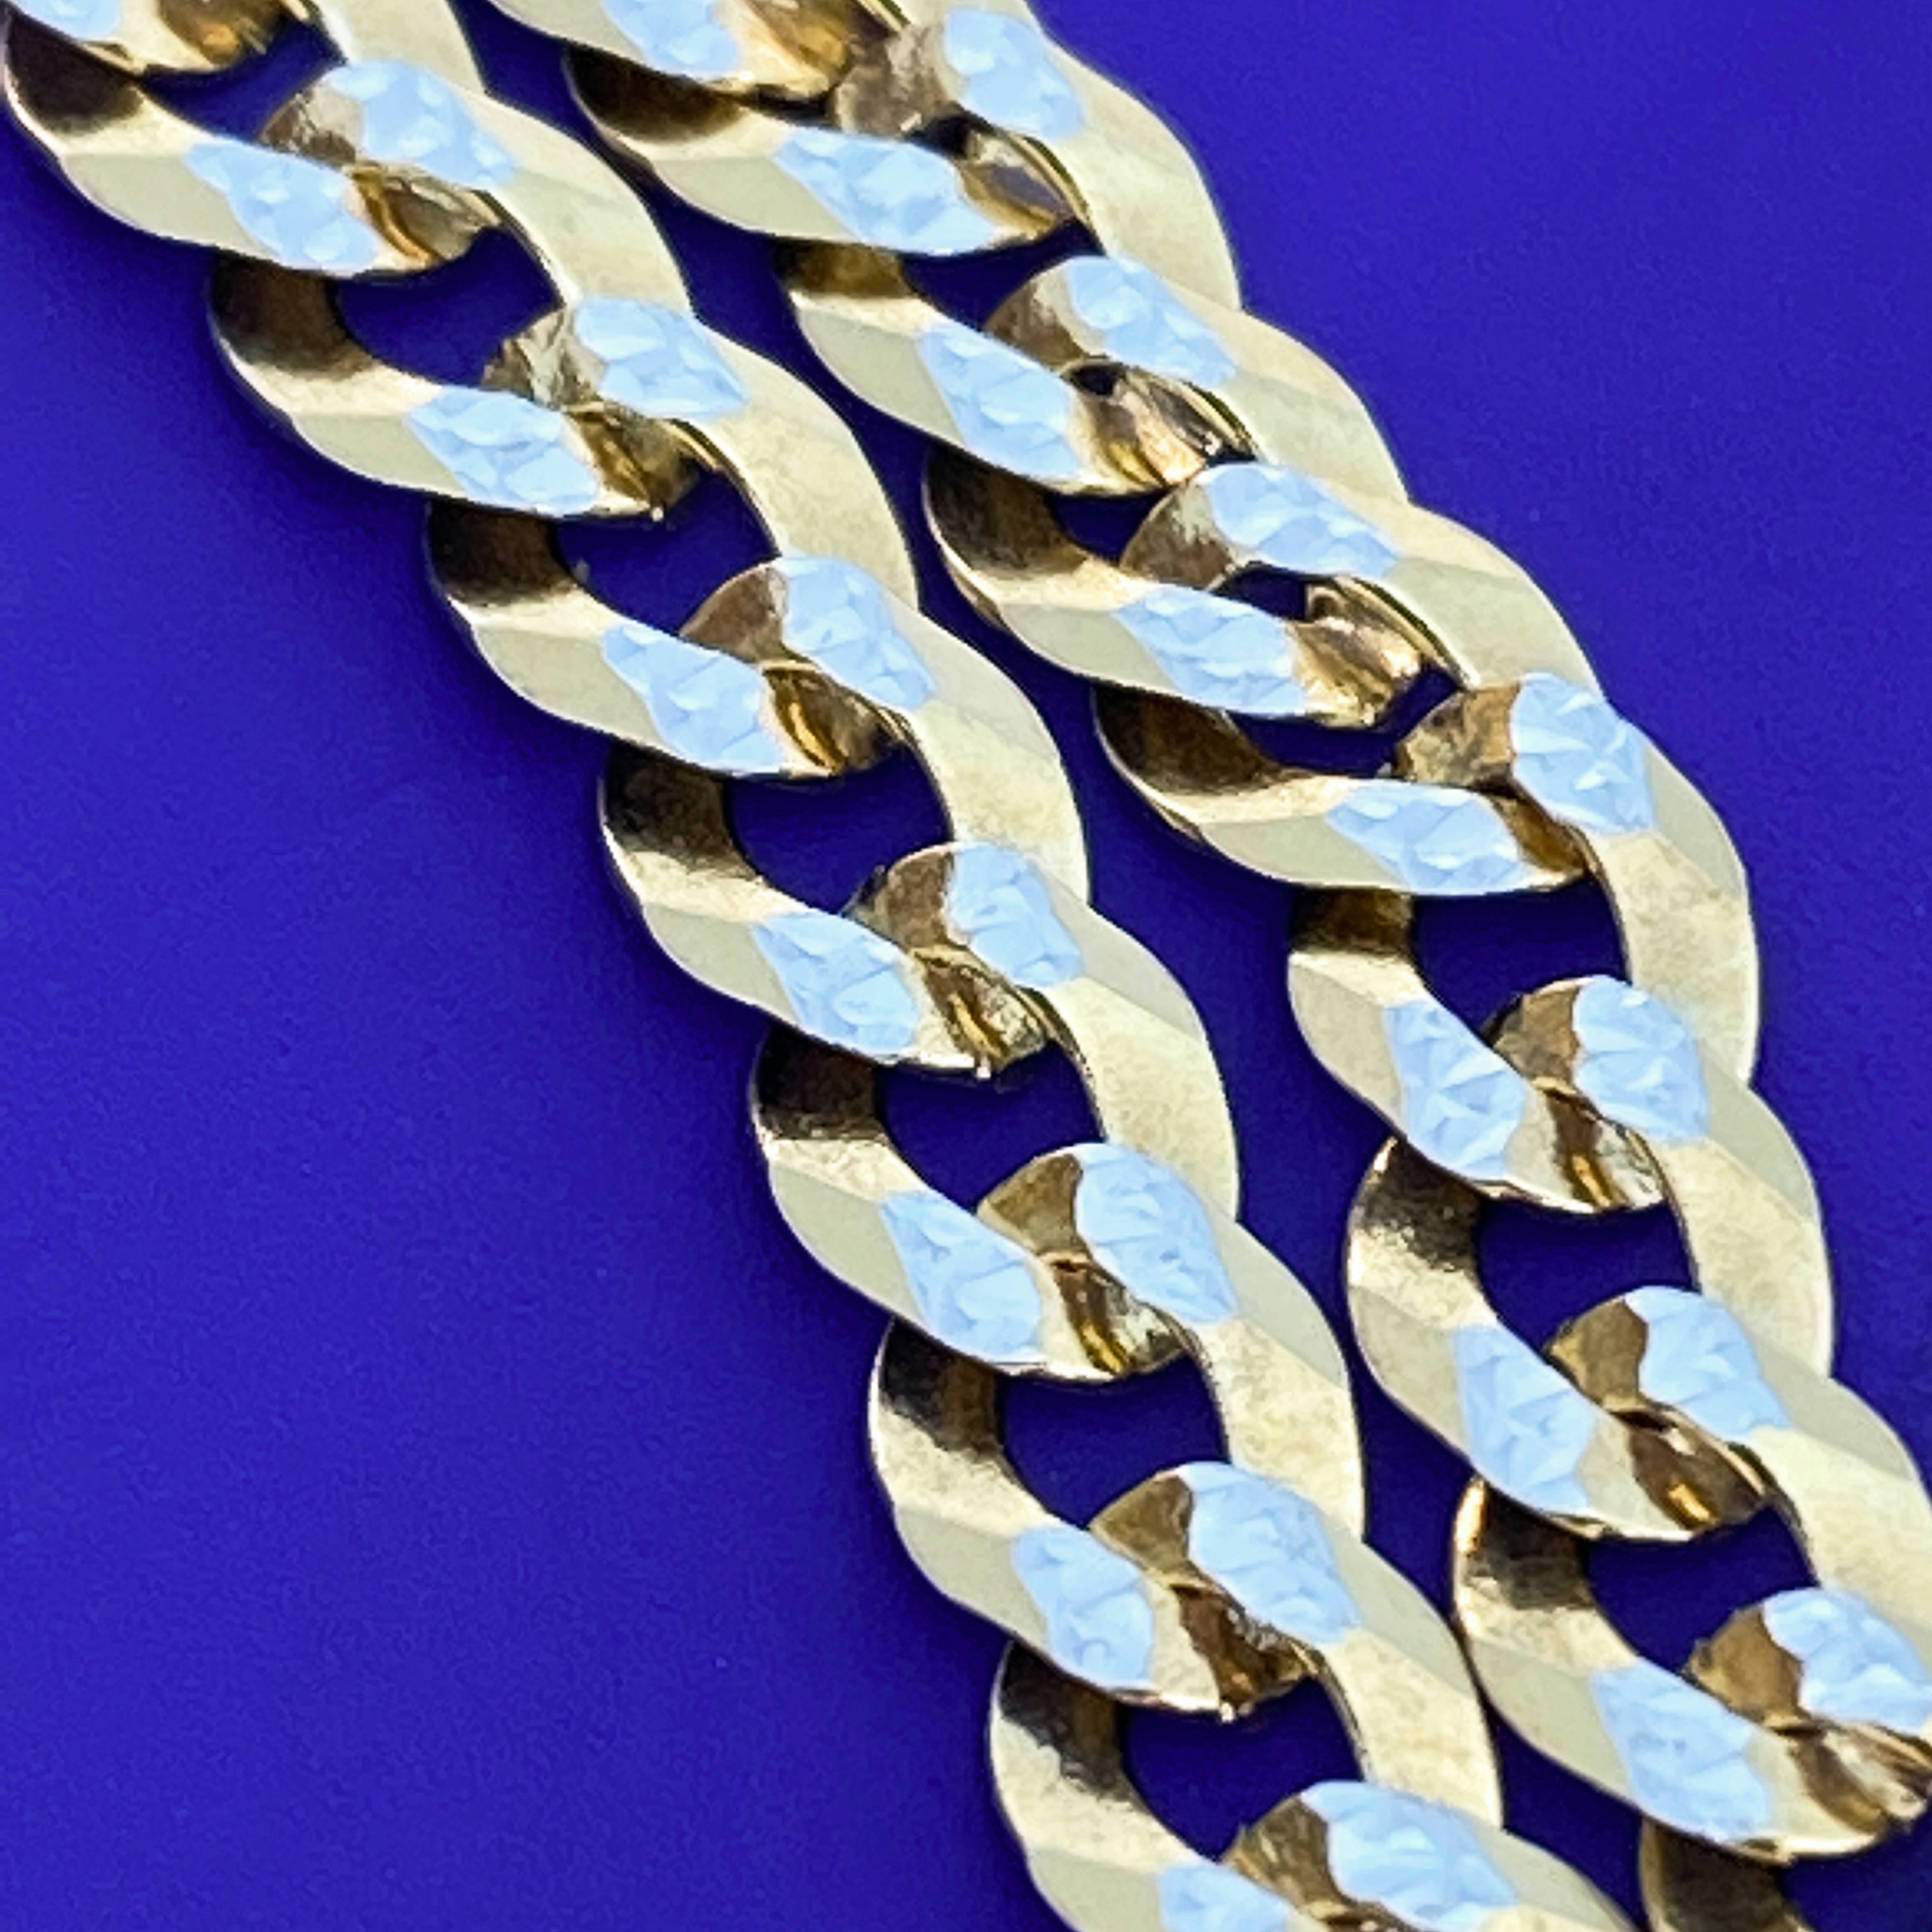 14K Gold Plated Over 925 Sterling Silver Two-Tone Diamond Cut Cuban Curb Chain 5MM Thick 18" Inch Choker Italy Necklace - image 4 of 13